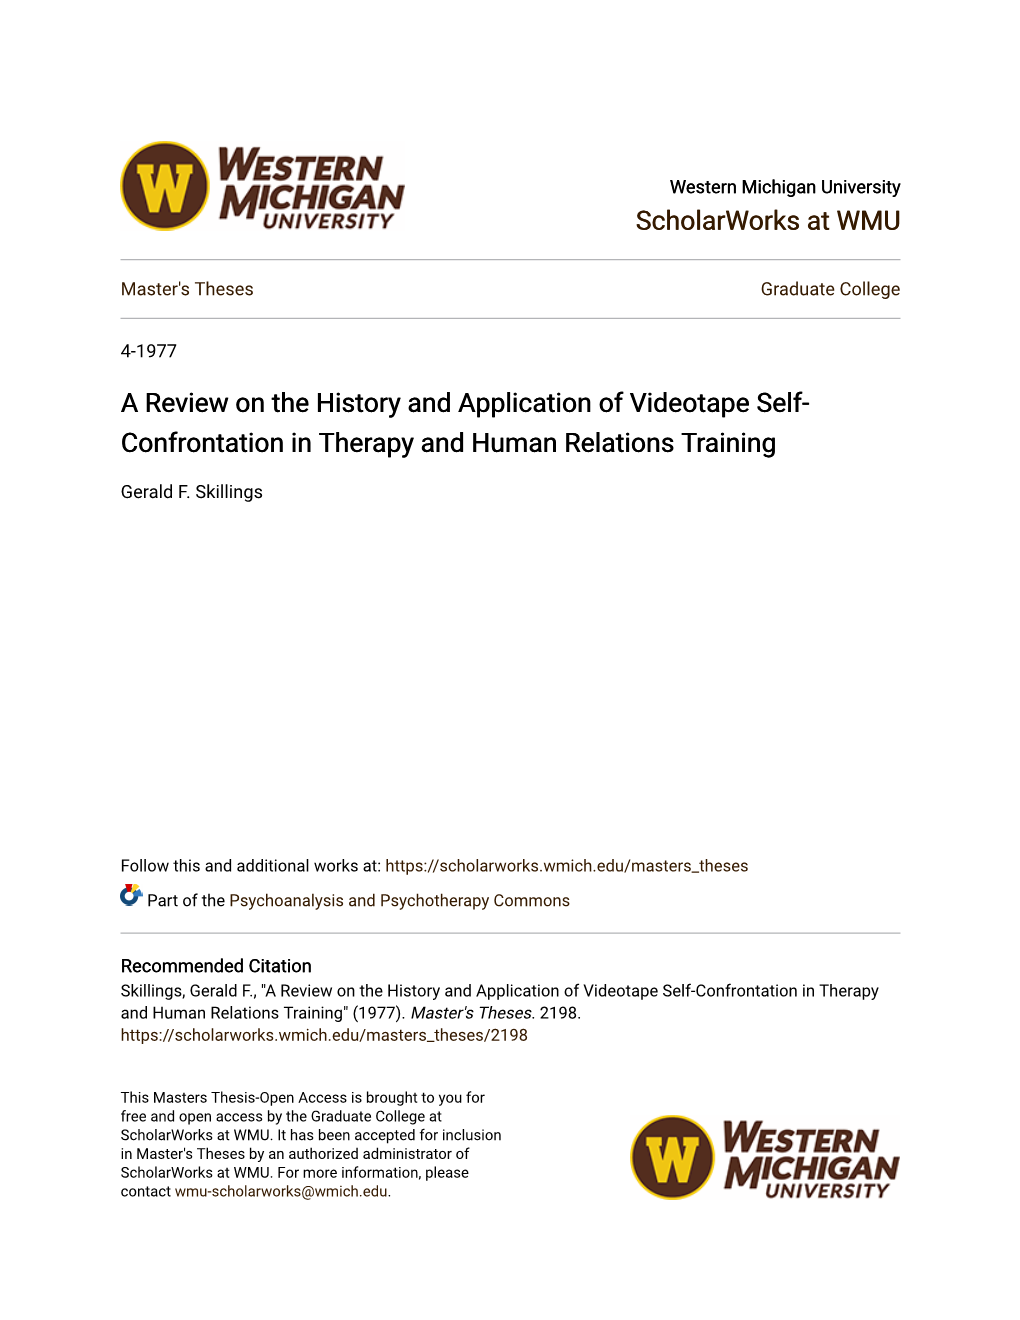 A Review on the History and Application of Videotape Self- Confrontation in Therapy and Human Relations Training